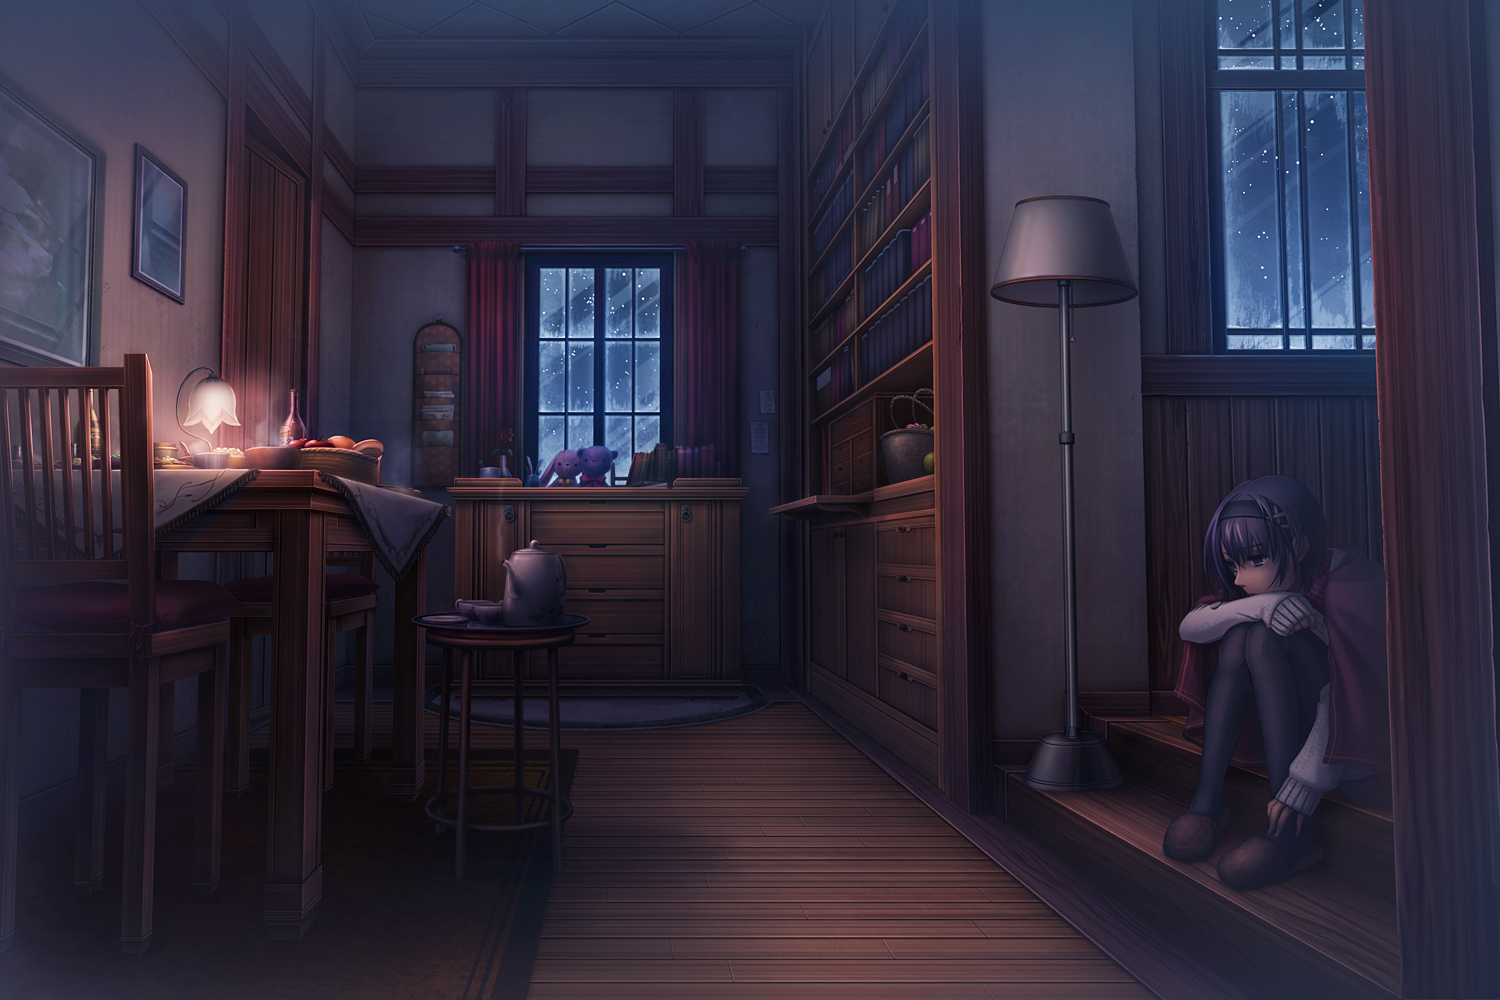 Anime 1500x1000 anime anime girls original characters room sitting alone house interior night winter cold